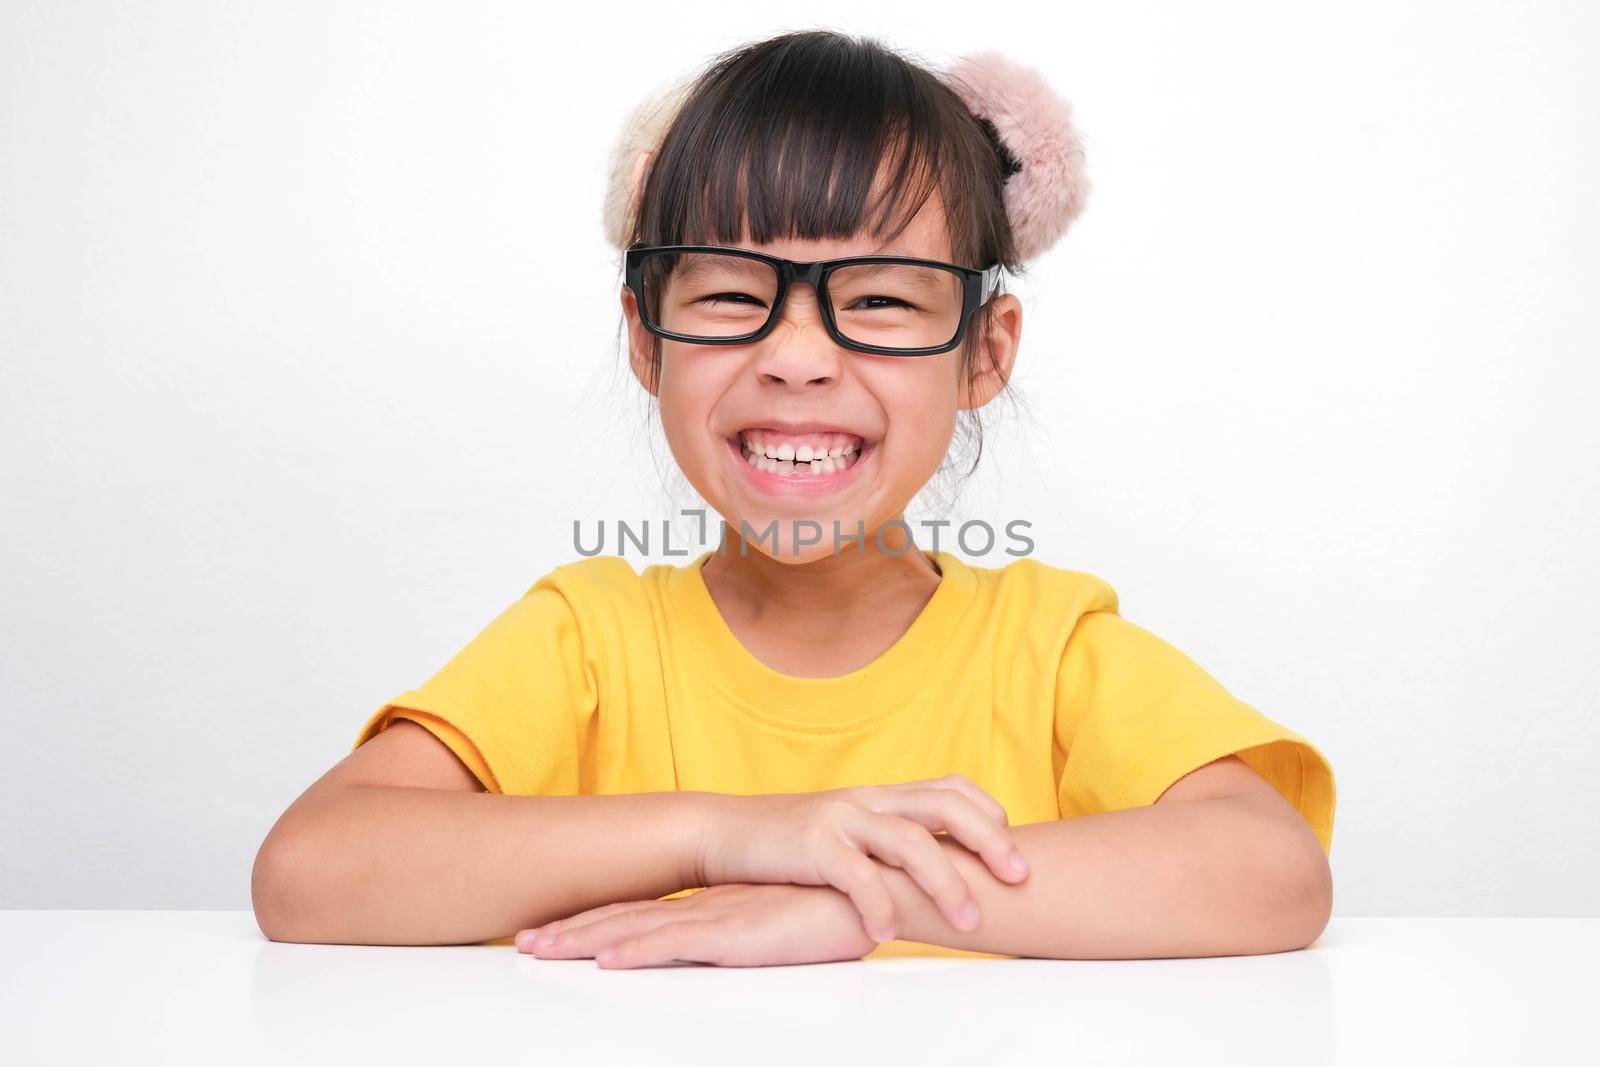 Cute dark haired girl smiling happily sitting at a table on white background and looking at the camera. Advertising childrens products